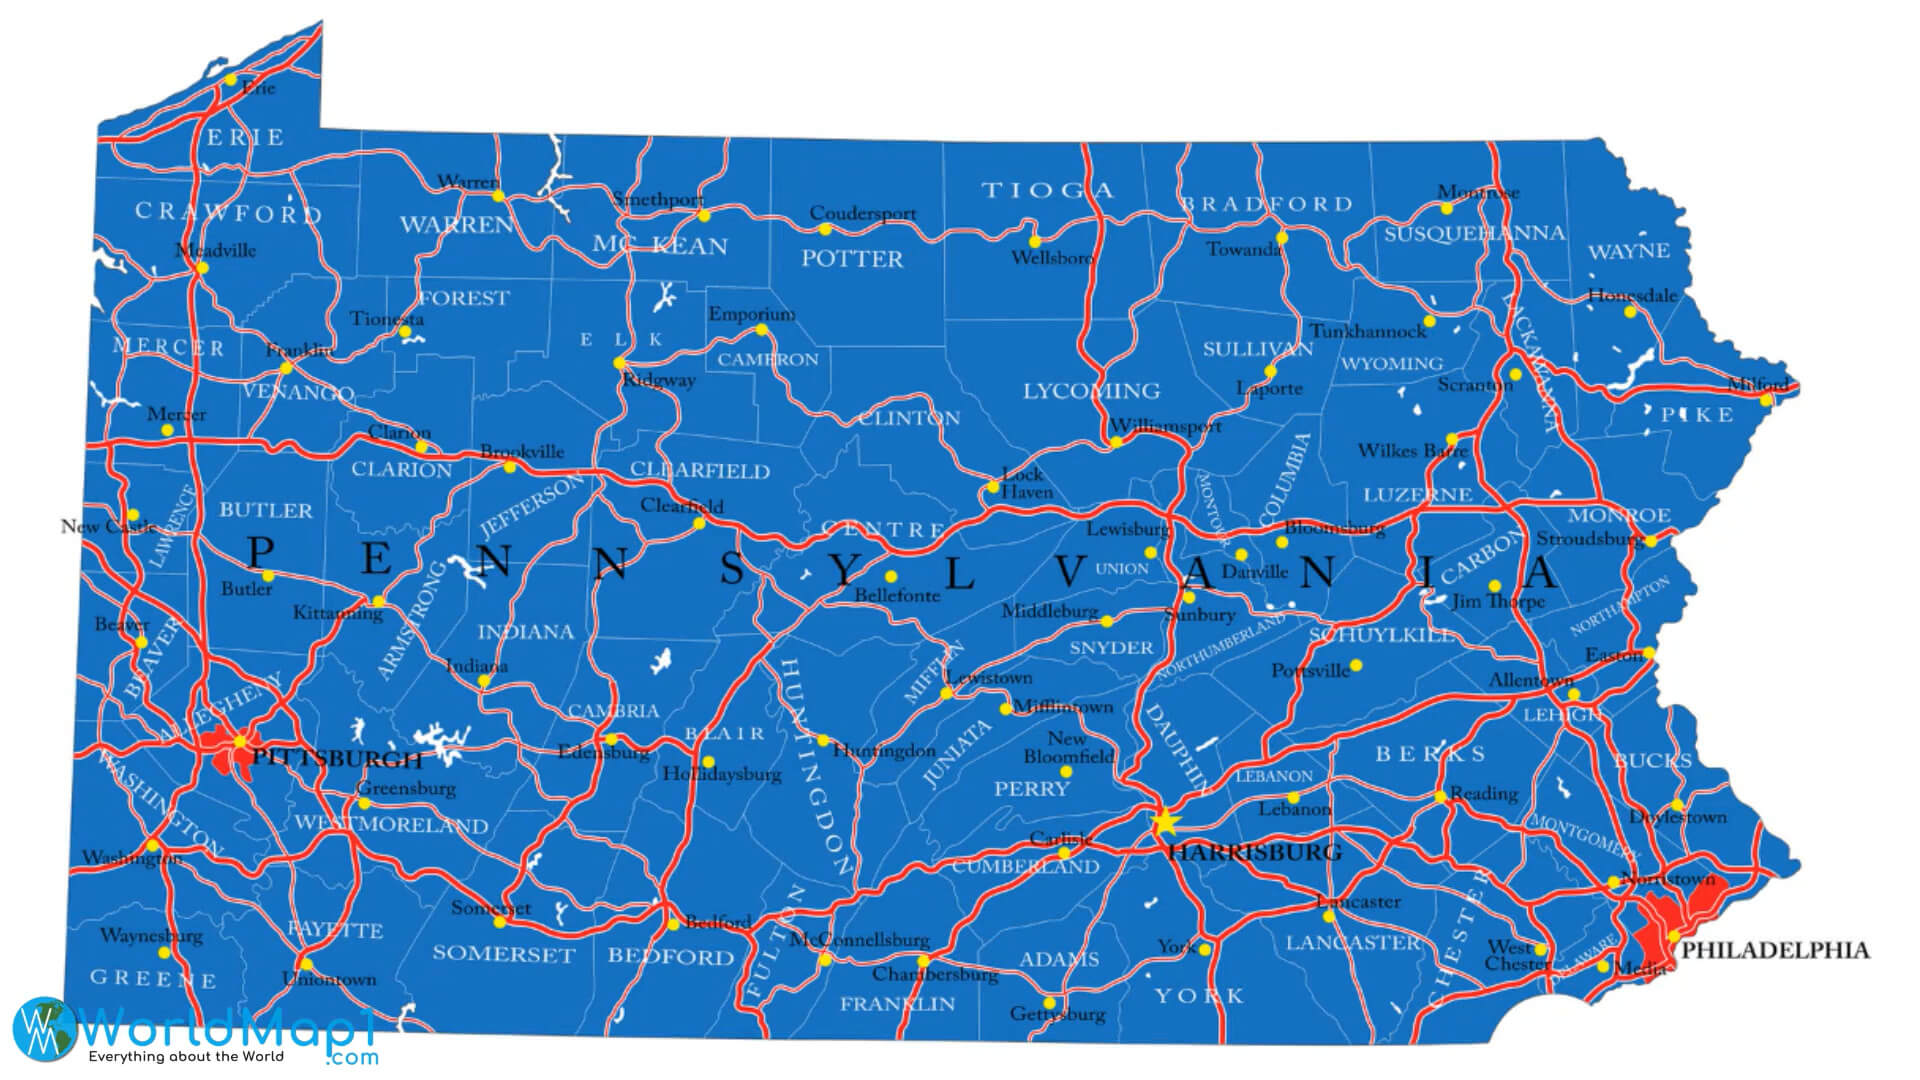 Map of Pennsylvania with Interstate Routes